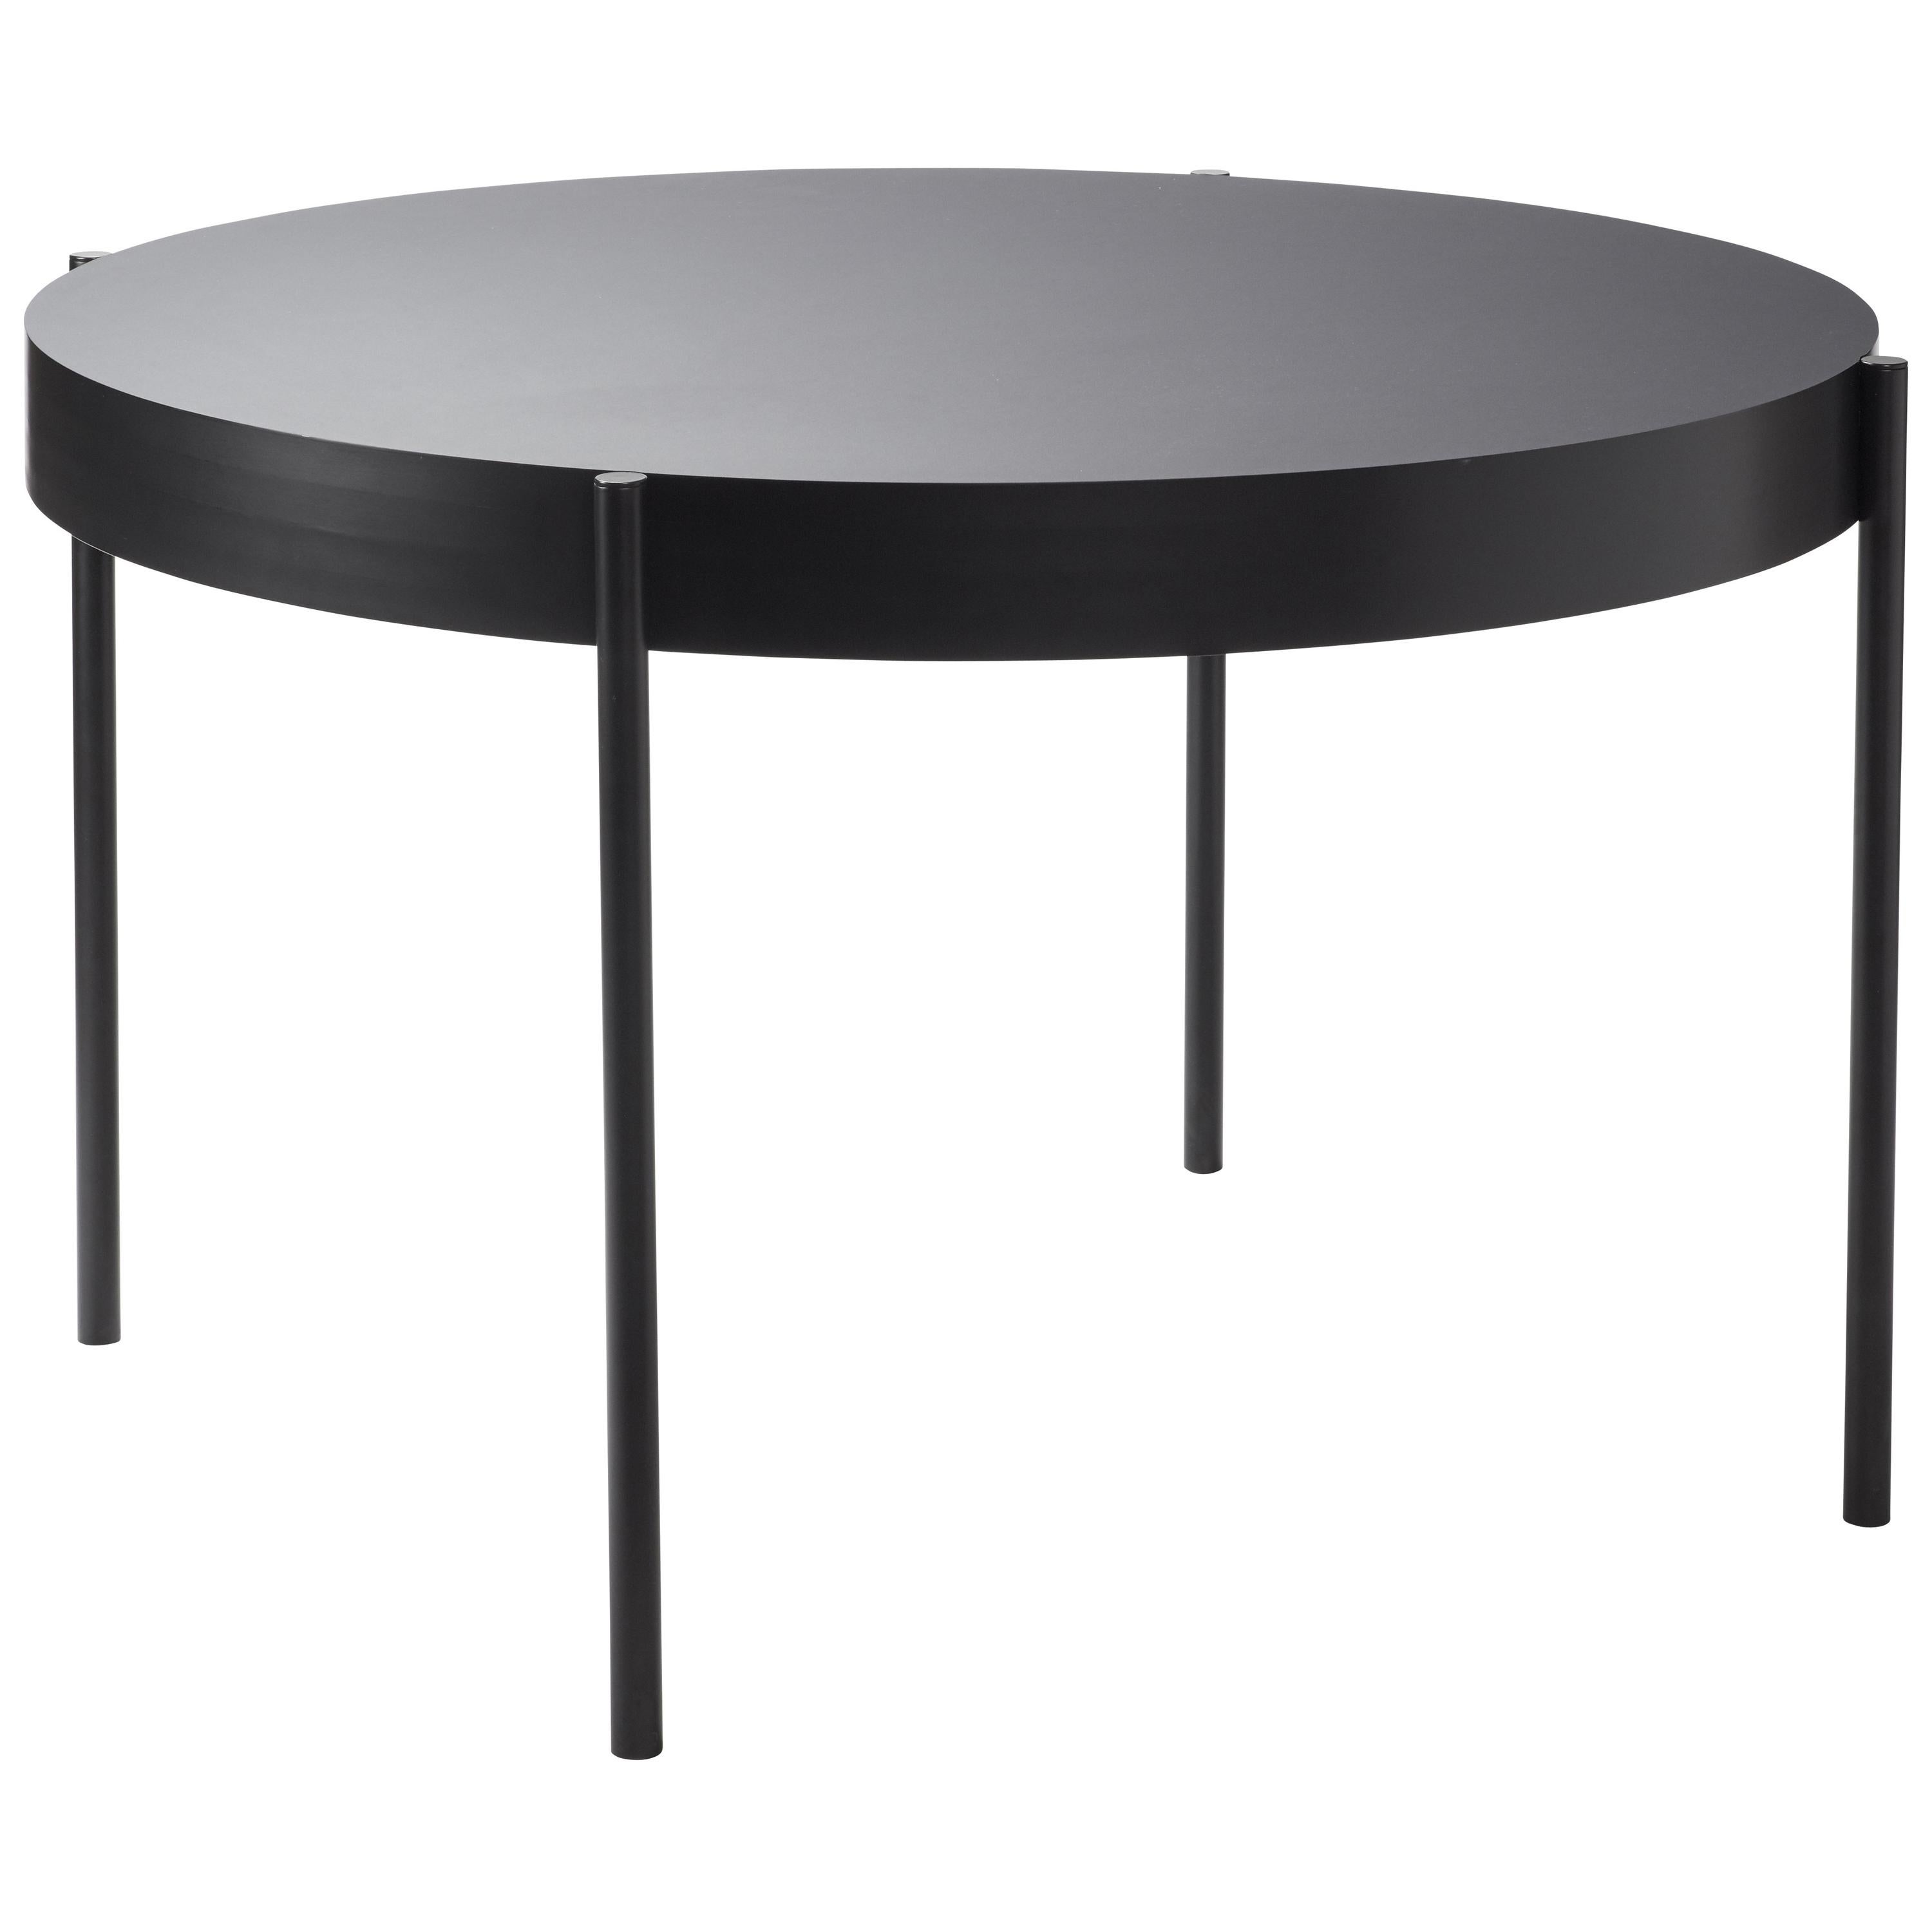 Series 430 Small Round Dining Table in Black by Verner Panton For Sale